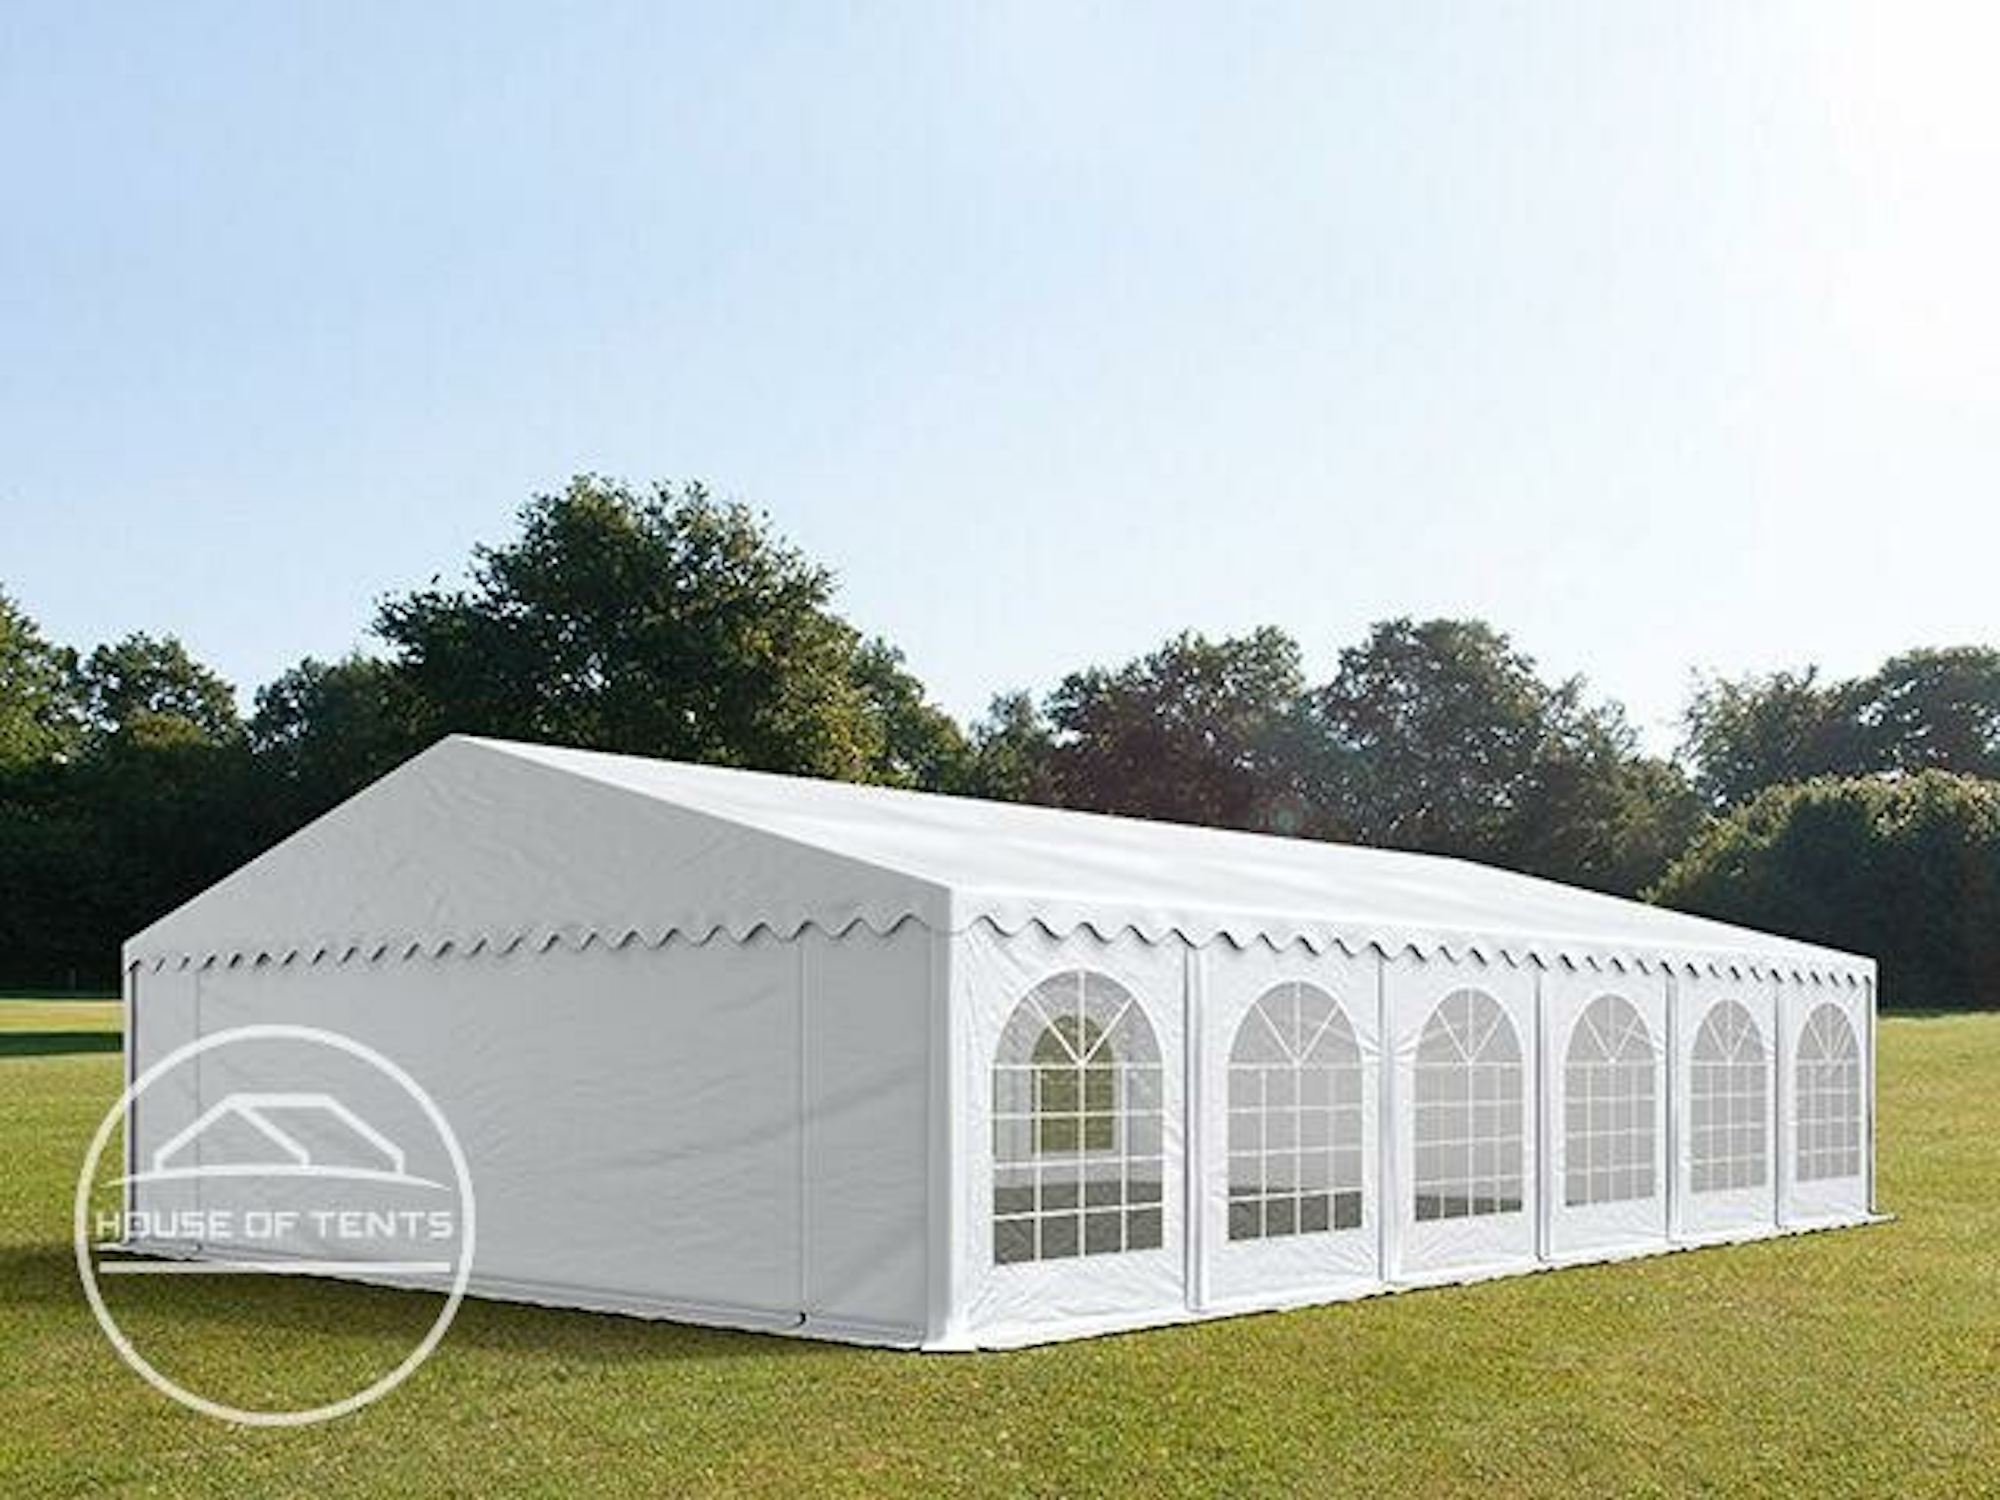 House of tents Marquees